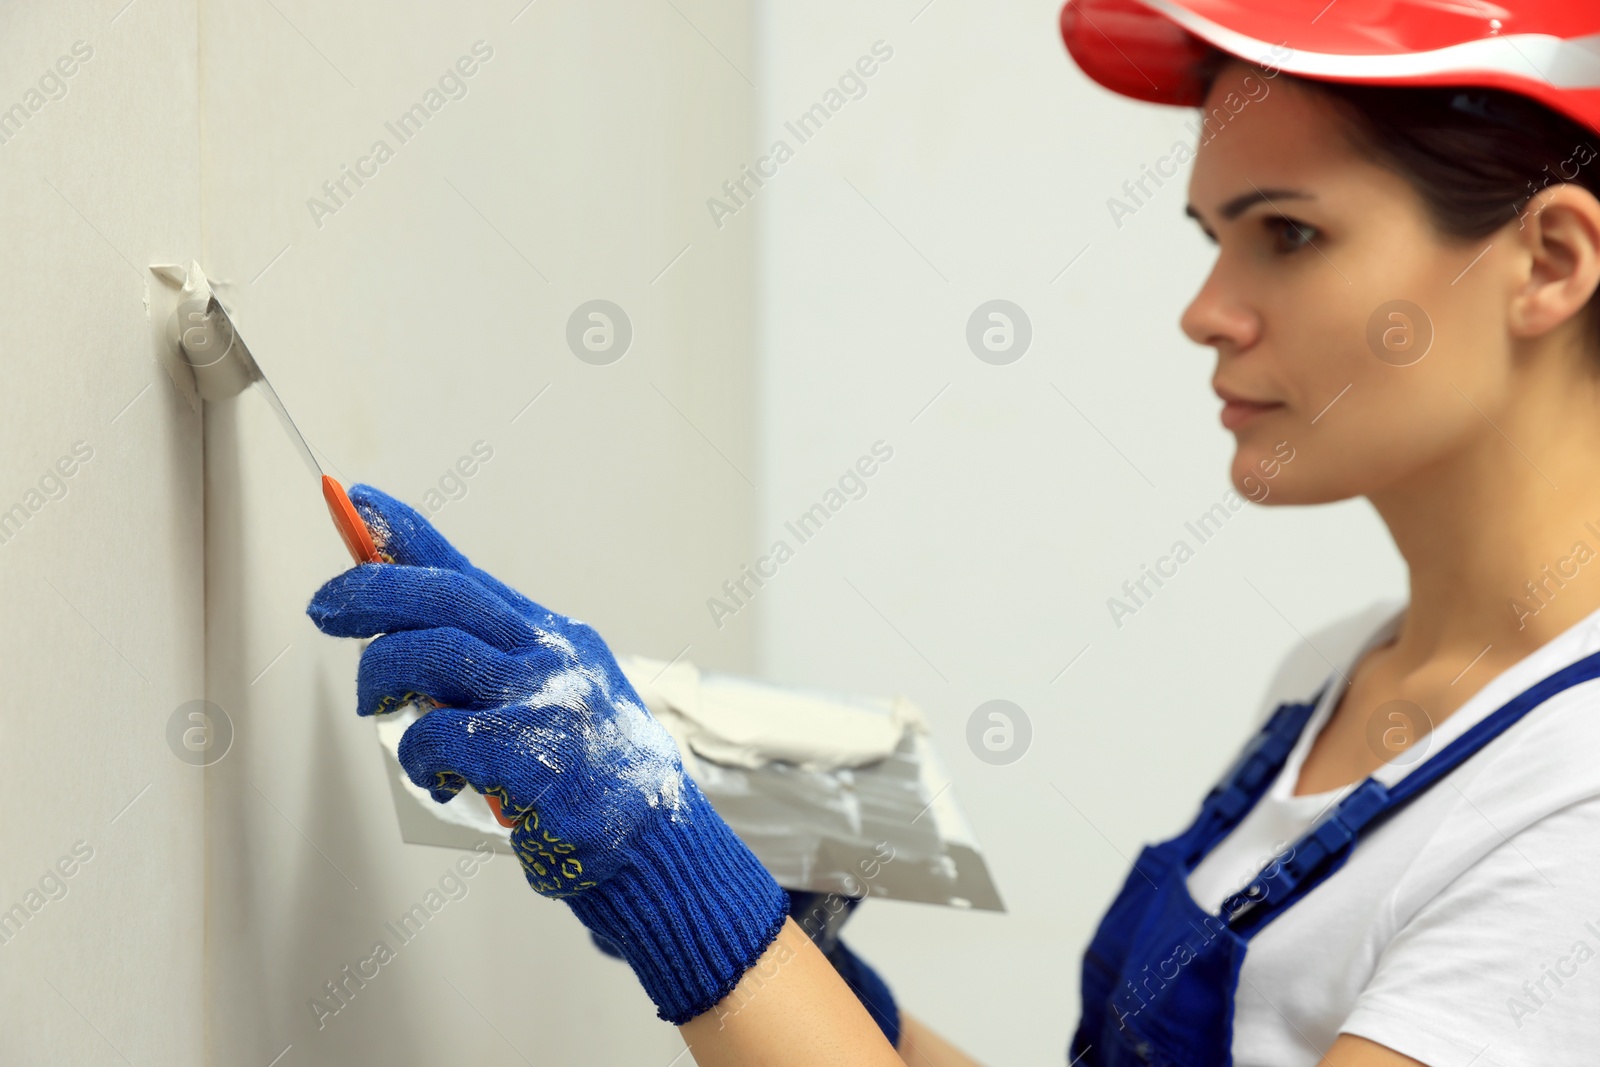 Photo of Professional worker in hard hat plastering wall with putty knives, focus on hand